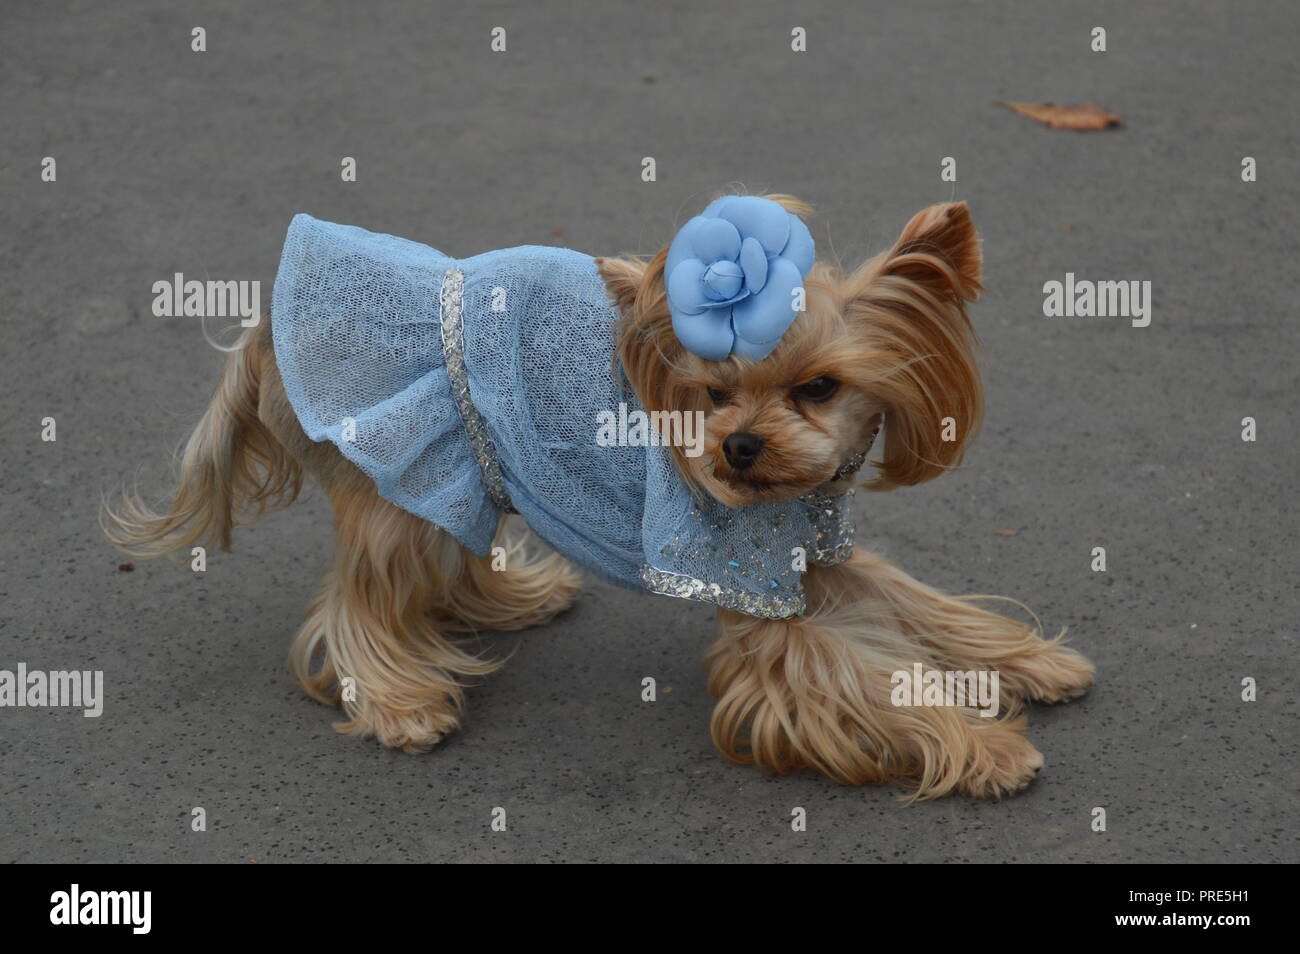 The Chanel-Inspired – Canine Couture Collection